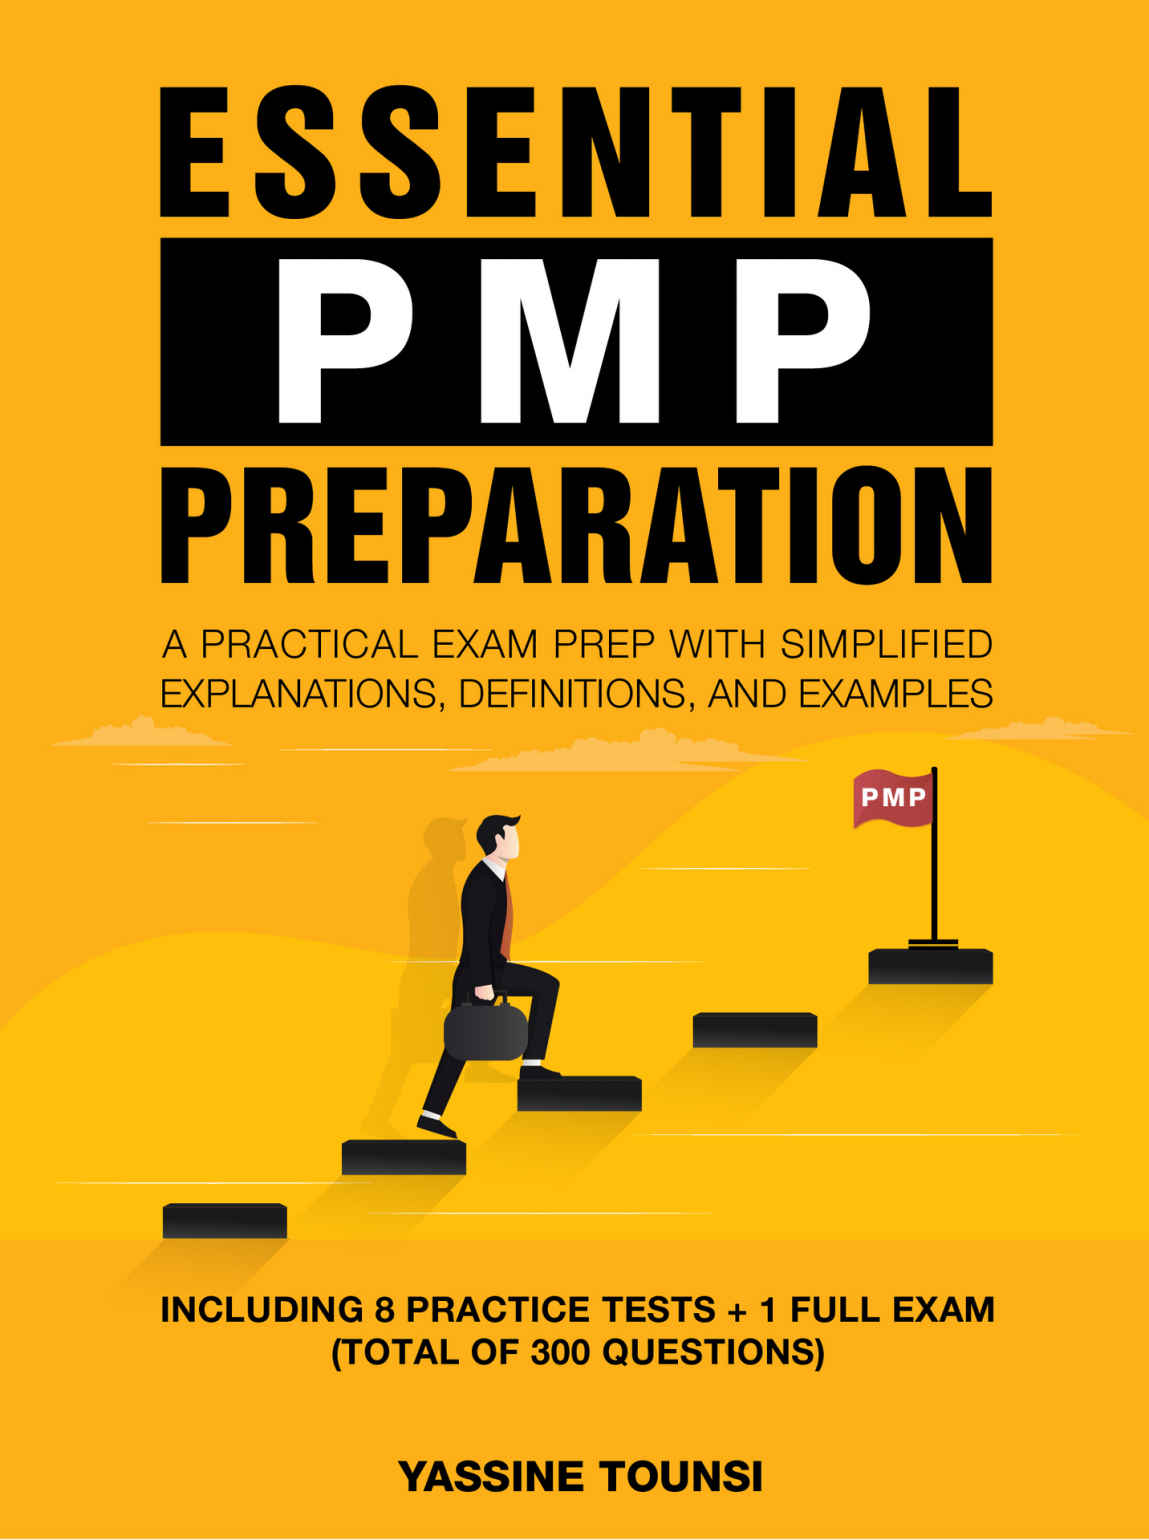 Essential PMP Preparation: A Practical Exam Prep with Simplified explanations, definitions, and examples - Aligned with PMBOK 7th Edition and the Agile Practice Guide